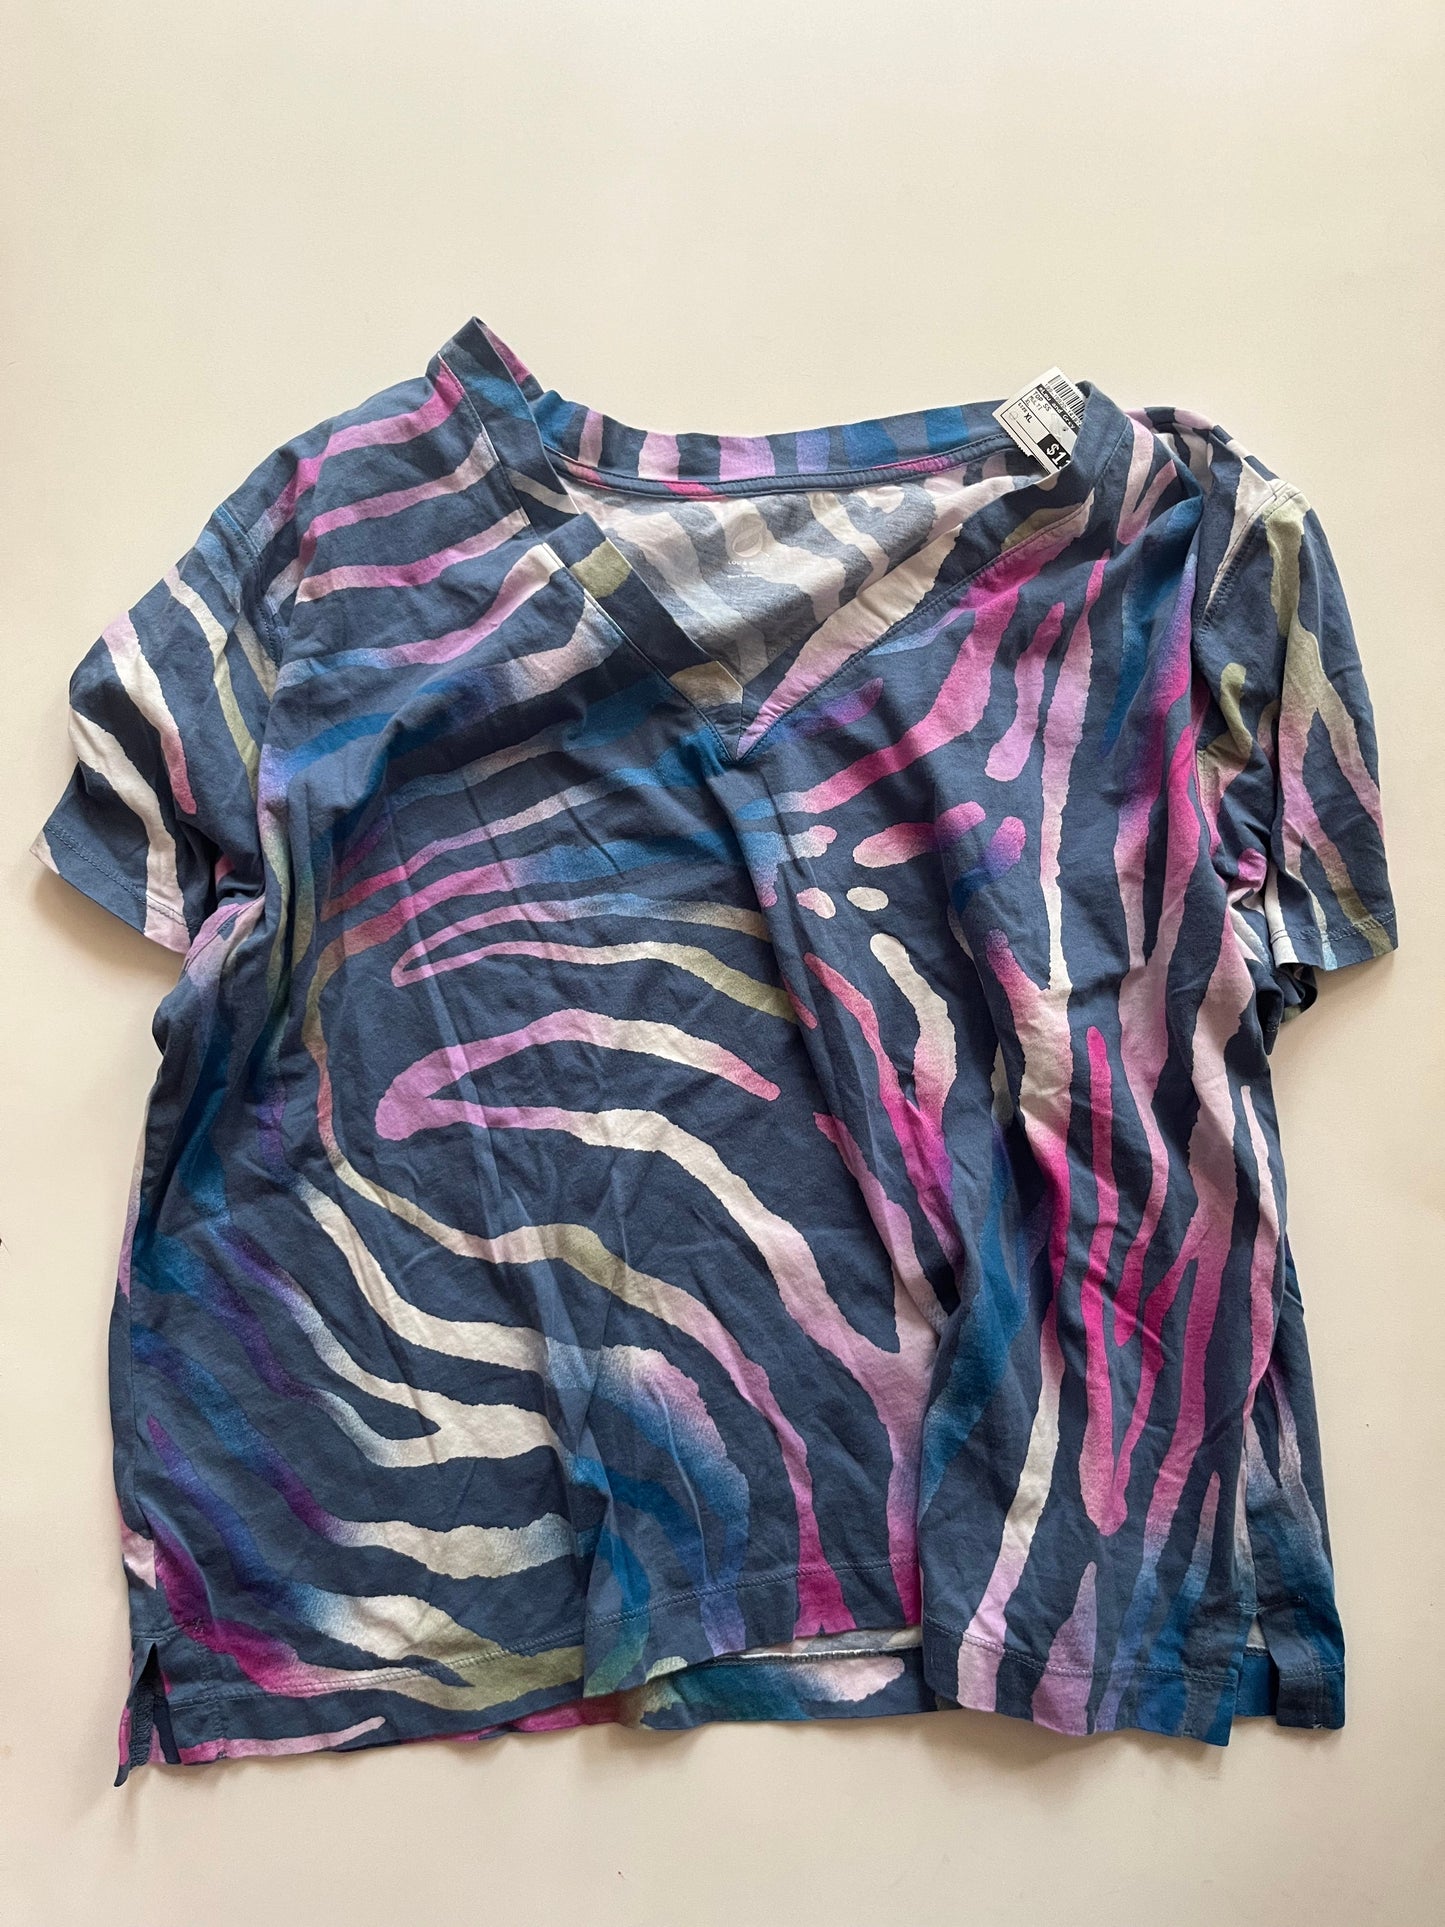 Multi-colored Top Short Sleeve Lou And Grey, Size Xl